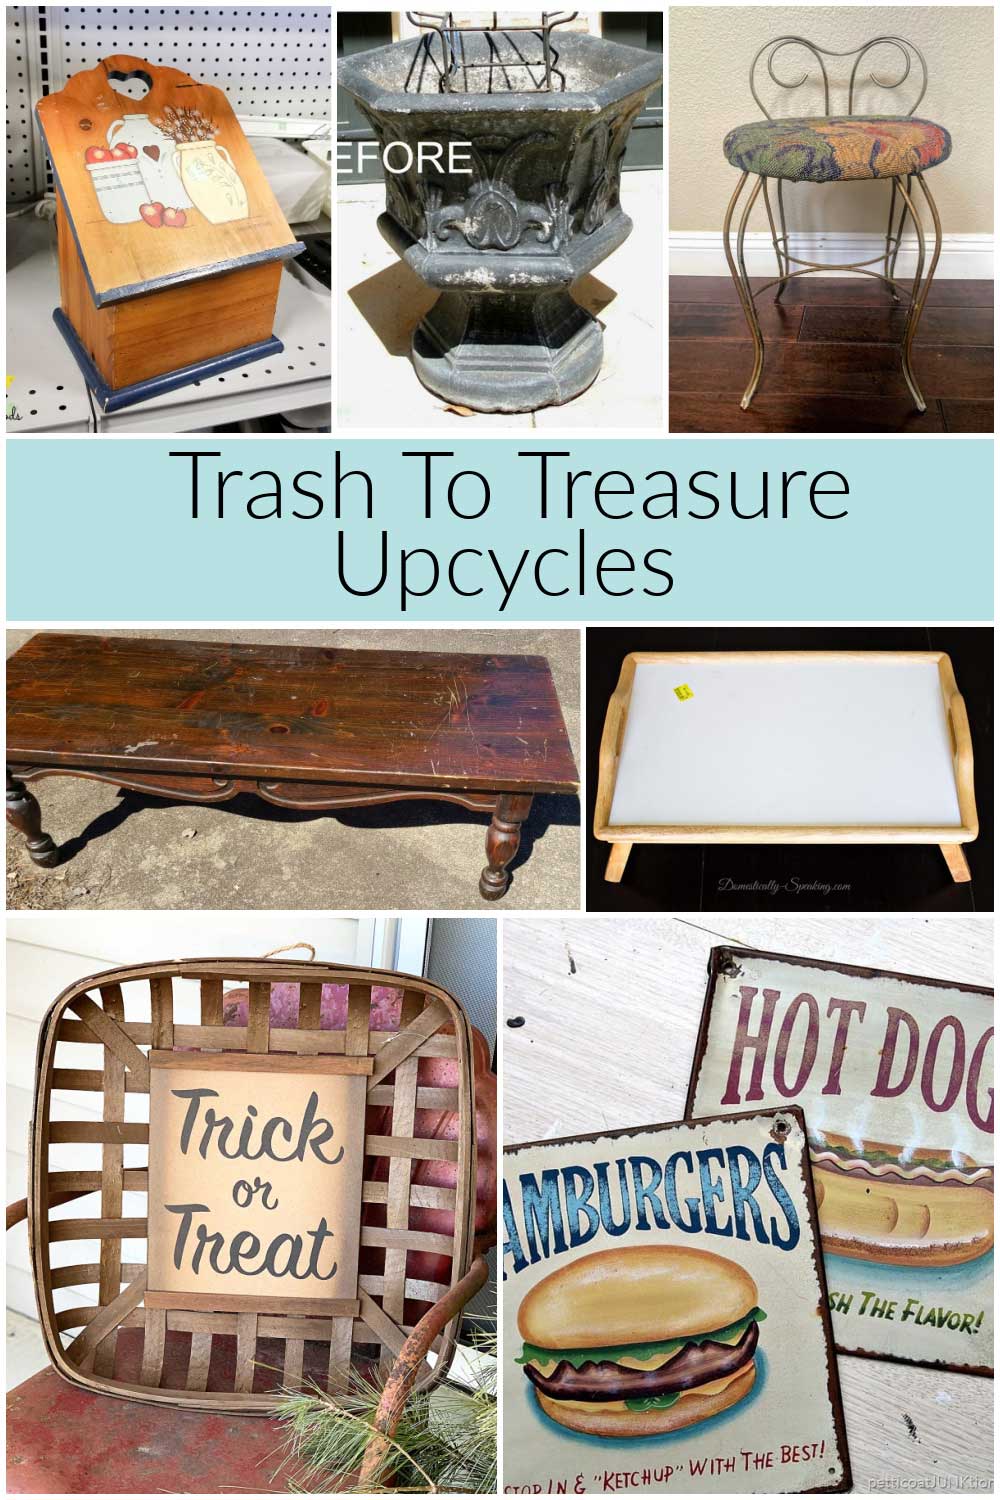 photo showing before images of trash to treasure upcycles